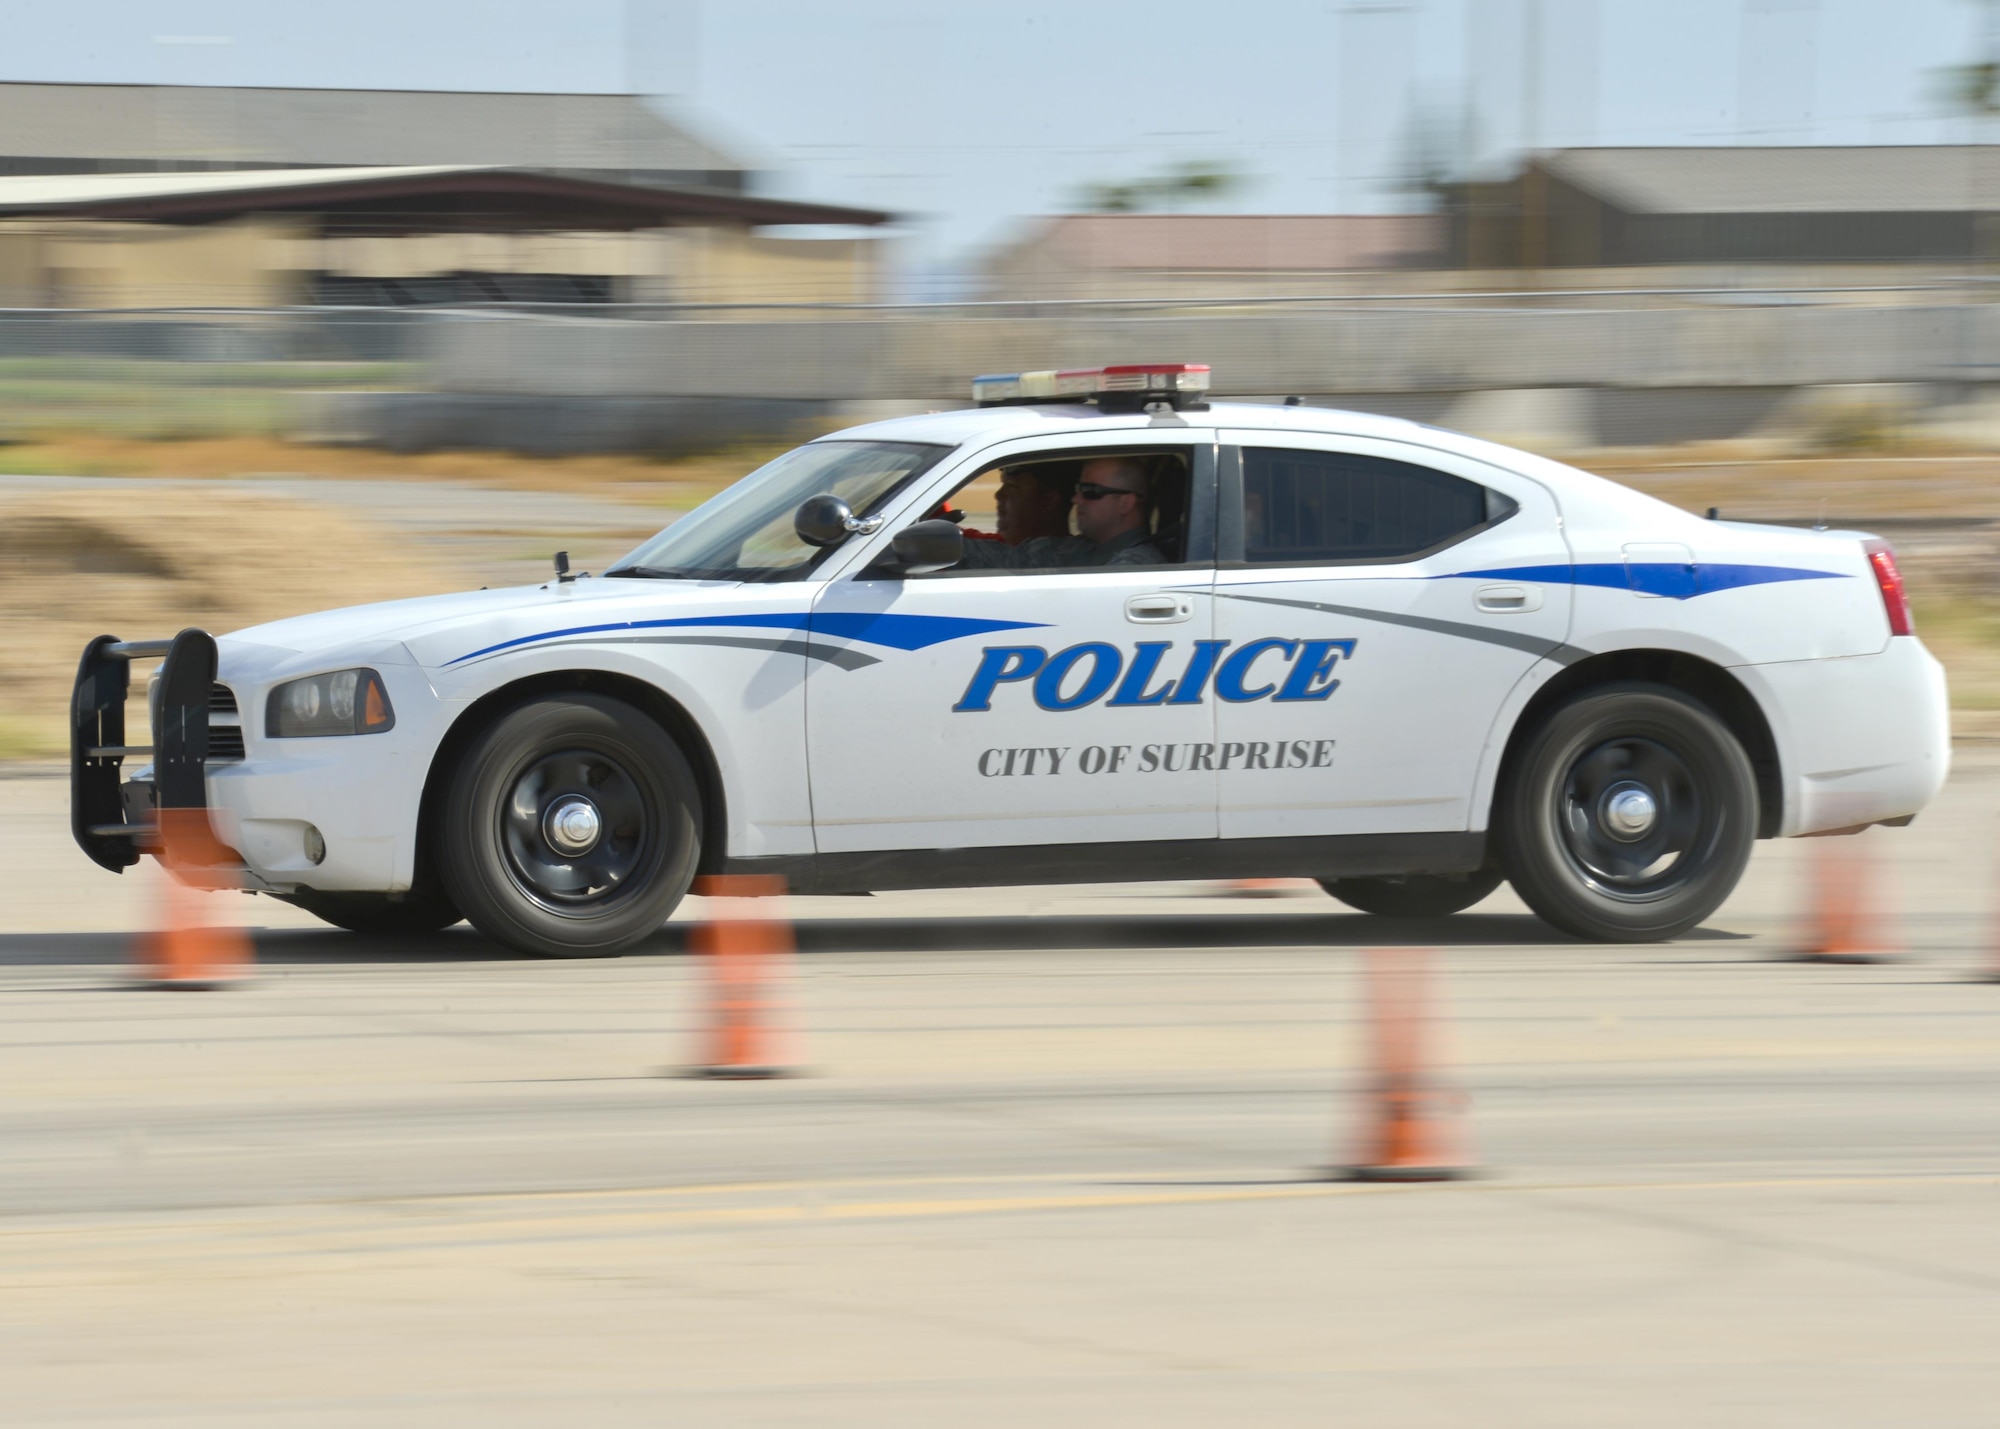 A city of Surprise police cruiser is driven through a staged course as part of an Emergency Vehicle Operations Course held at Luke Air Force Base, Ariz., Aug. 23, 2017. The EVOC training provided hands-on, realistic training to the 56th Security Forces Squadron as well as local police departments. (U.S. Air Force photo/Airman 1st Class Caleb Worpel)